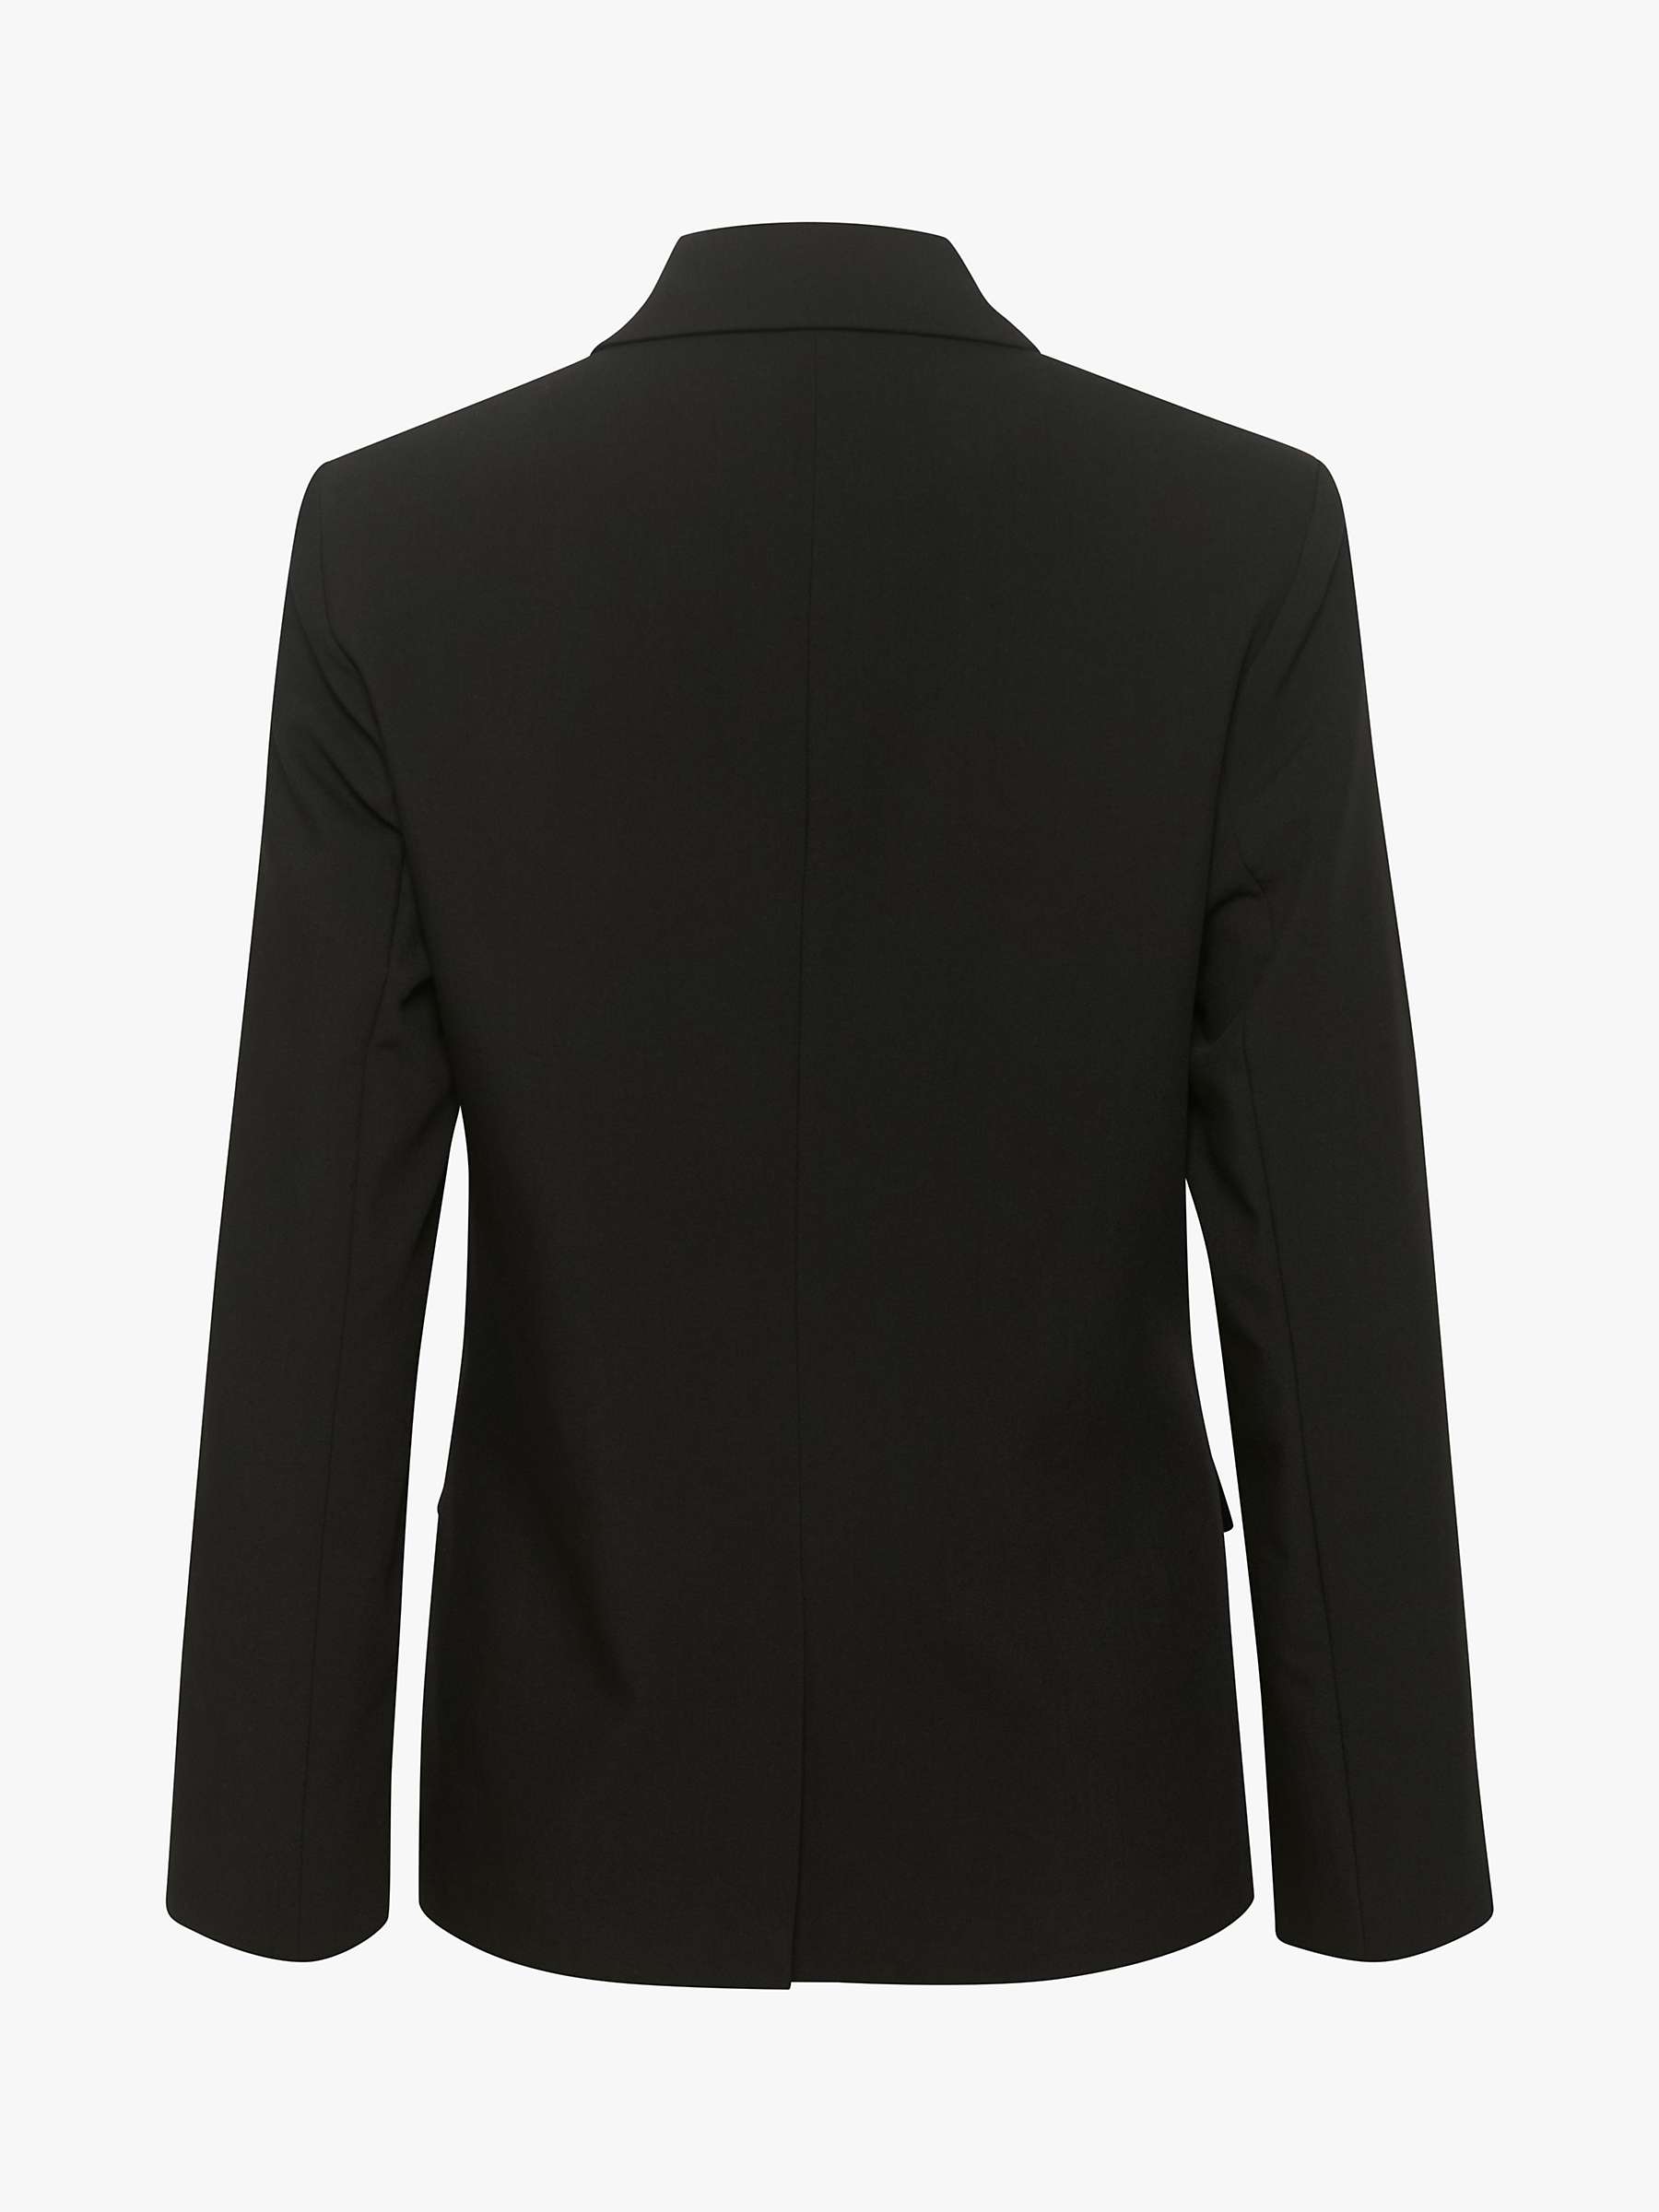 Buy MY ESSENTIAL WARDROBE Space Double Breasted Blazer, Black Online at johnlewis.com